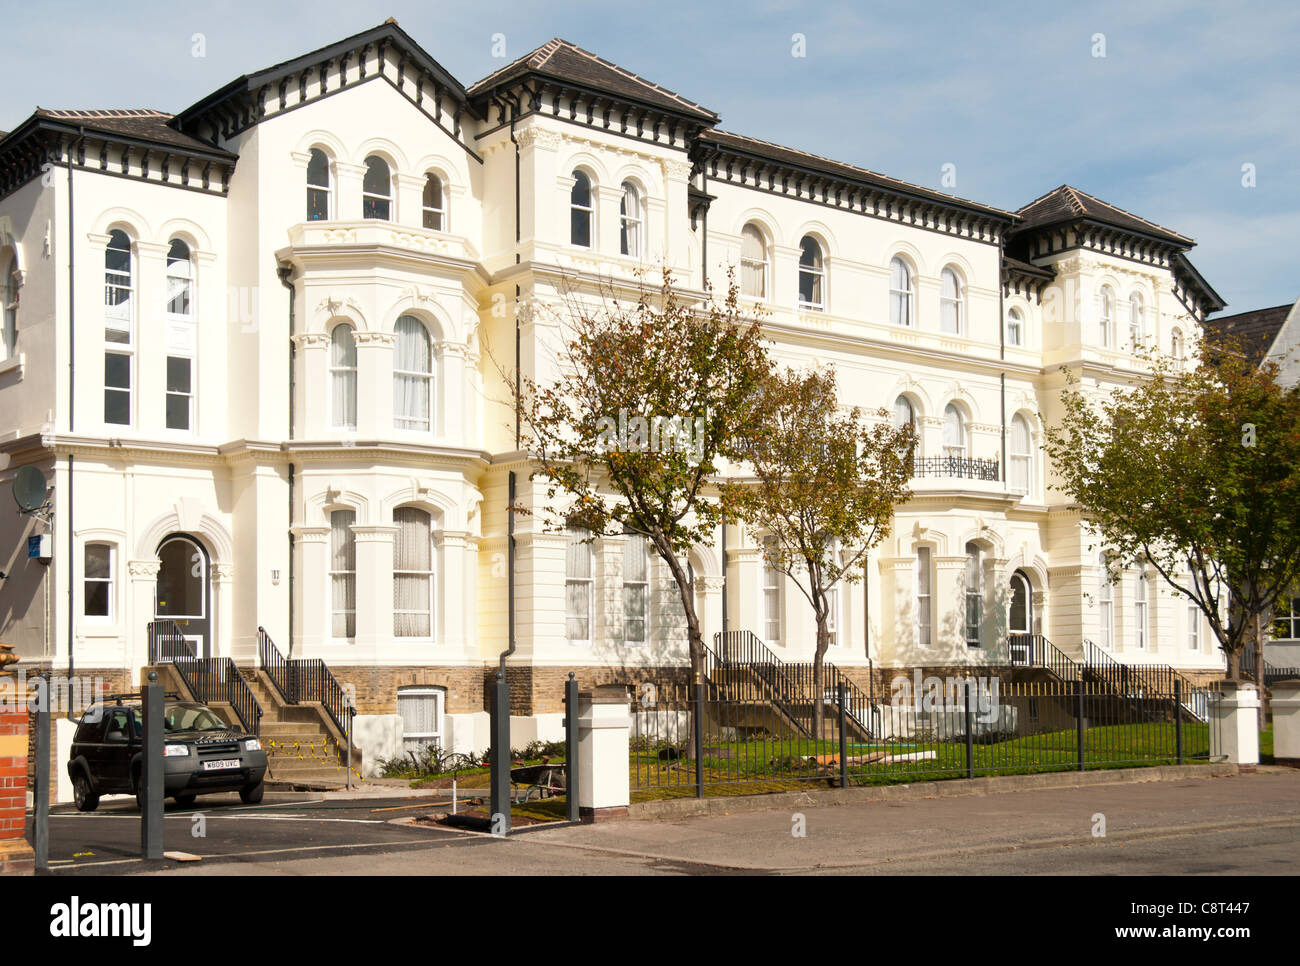 Venetian Villas, Hathersage Road, Manchester, England, UK. A converted Victorian property. Stock Photo